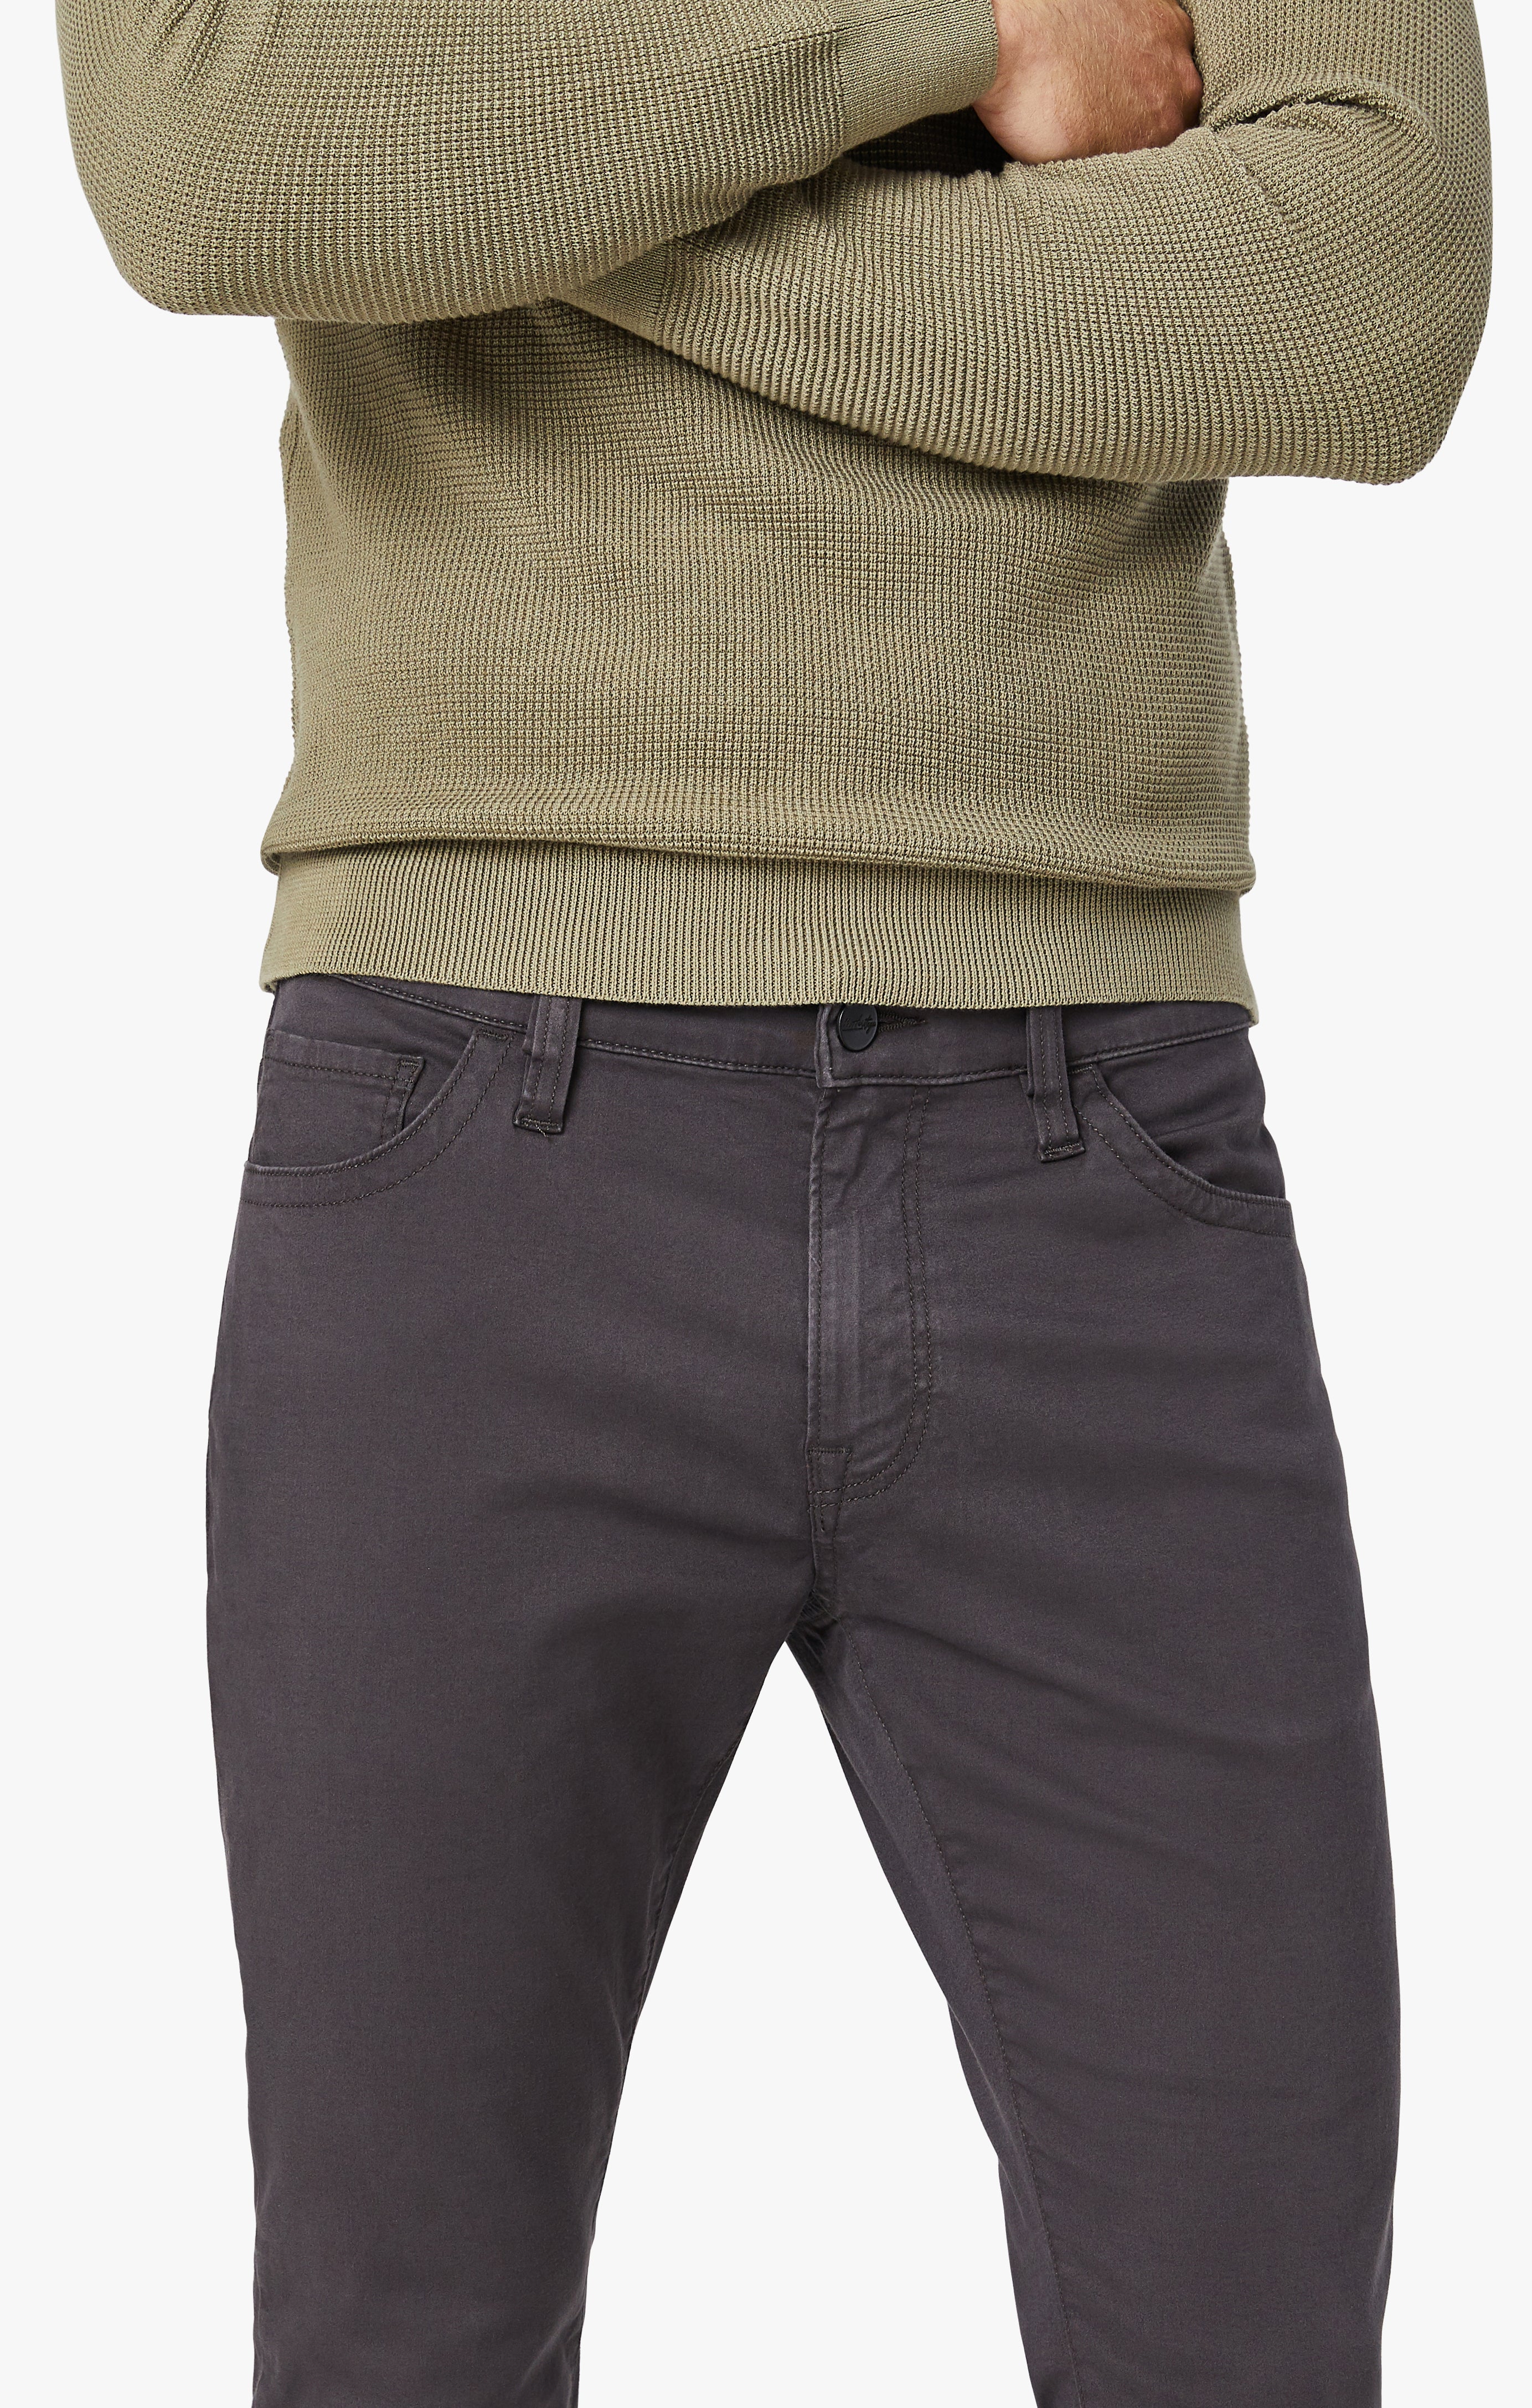 Cool Tapered Leg Pants In Anthracite Twill Image 6